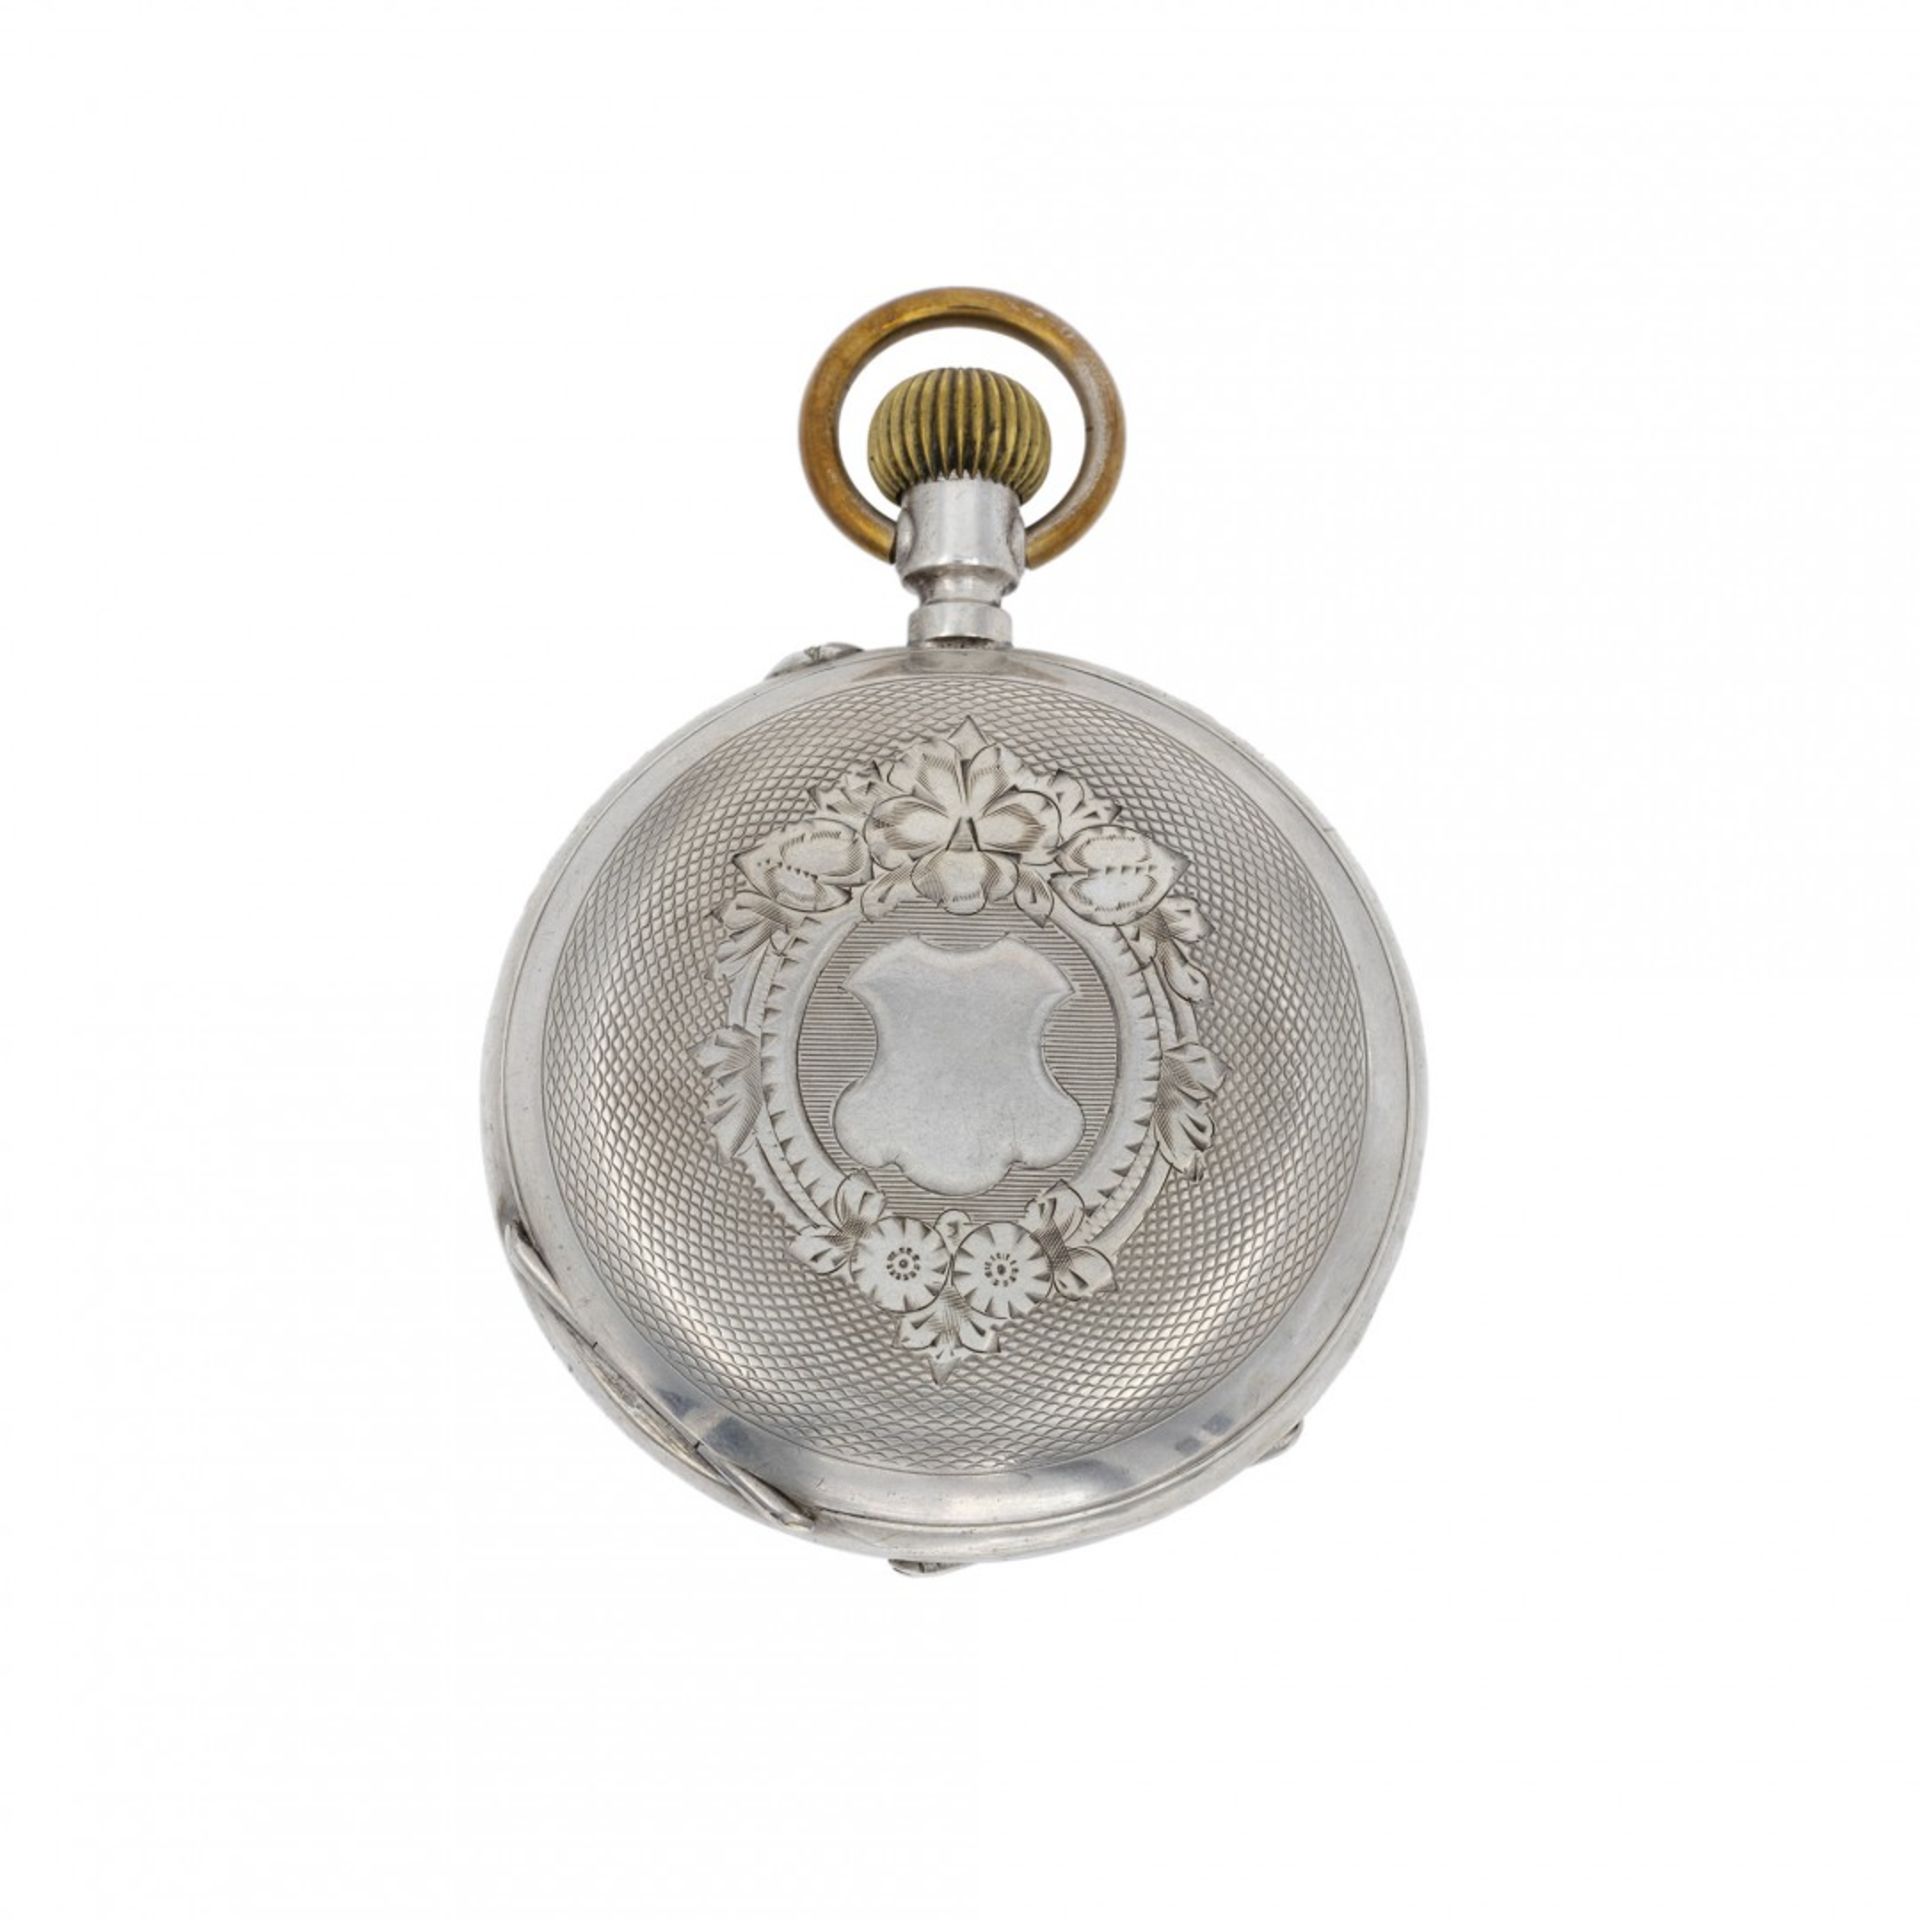 DOUBLE FACE SILVER WATCH WITH CALENDAR AND 24-HOUR DIAL, CIRCA 1880 - Image 3 of 3